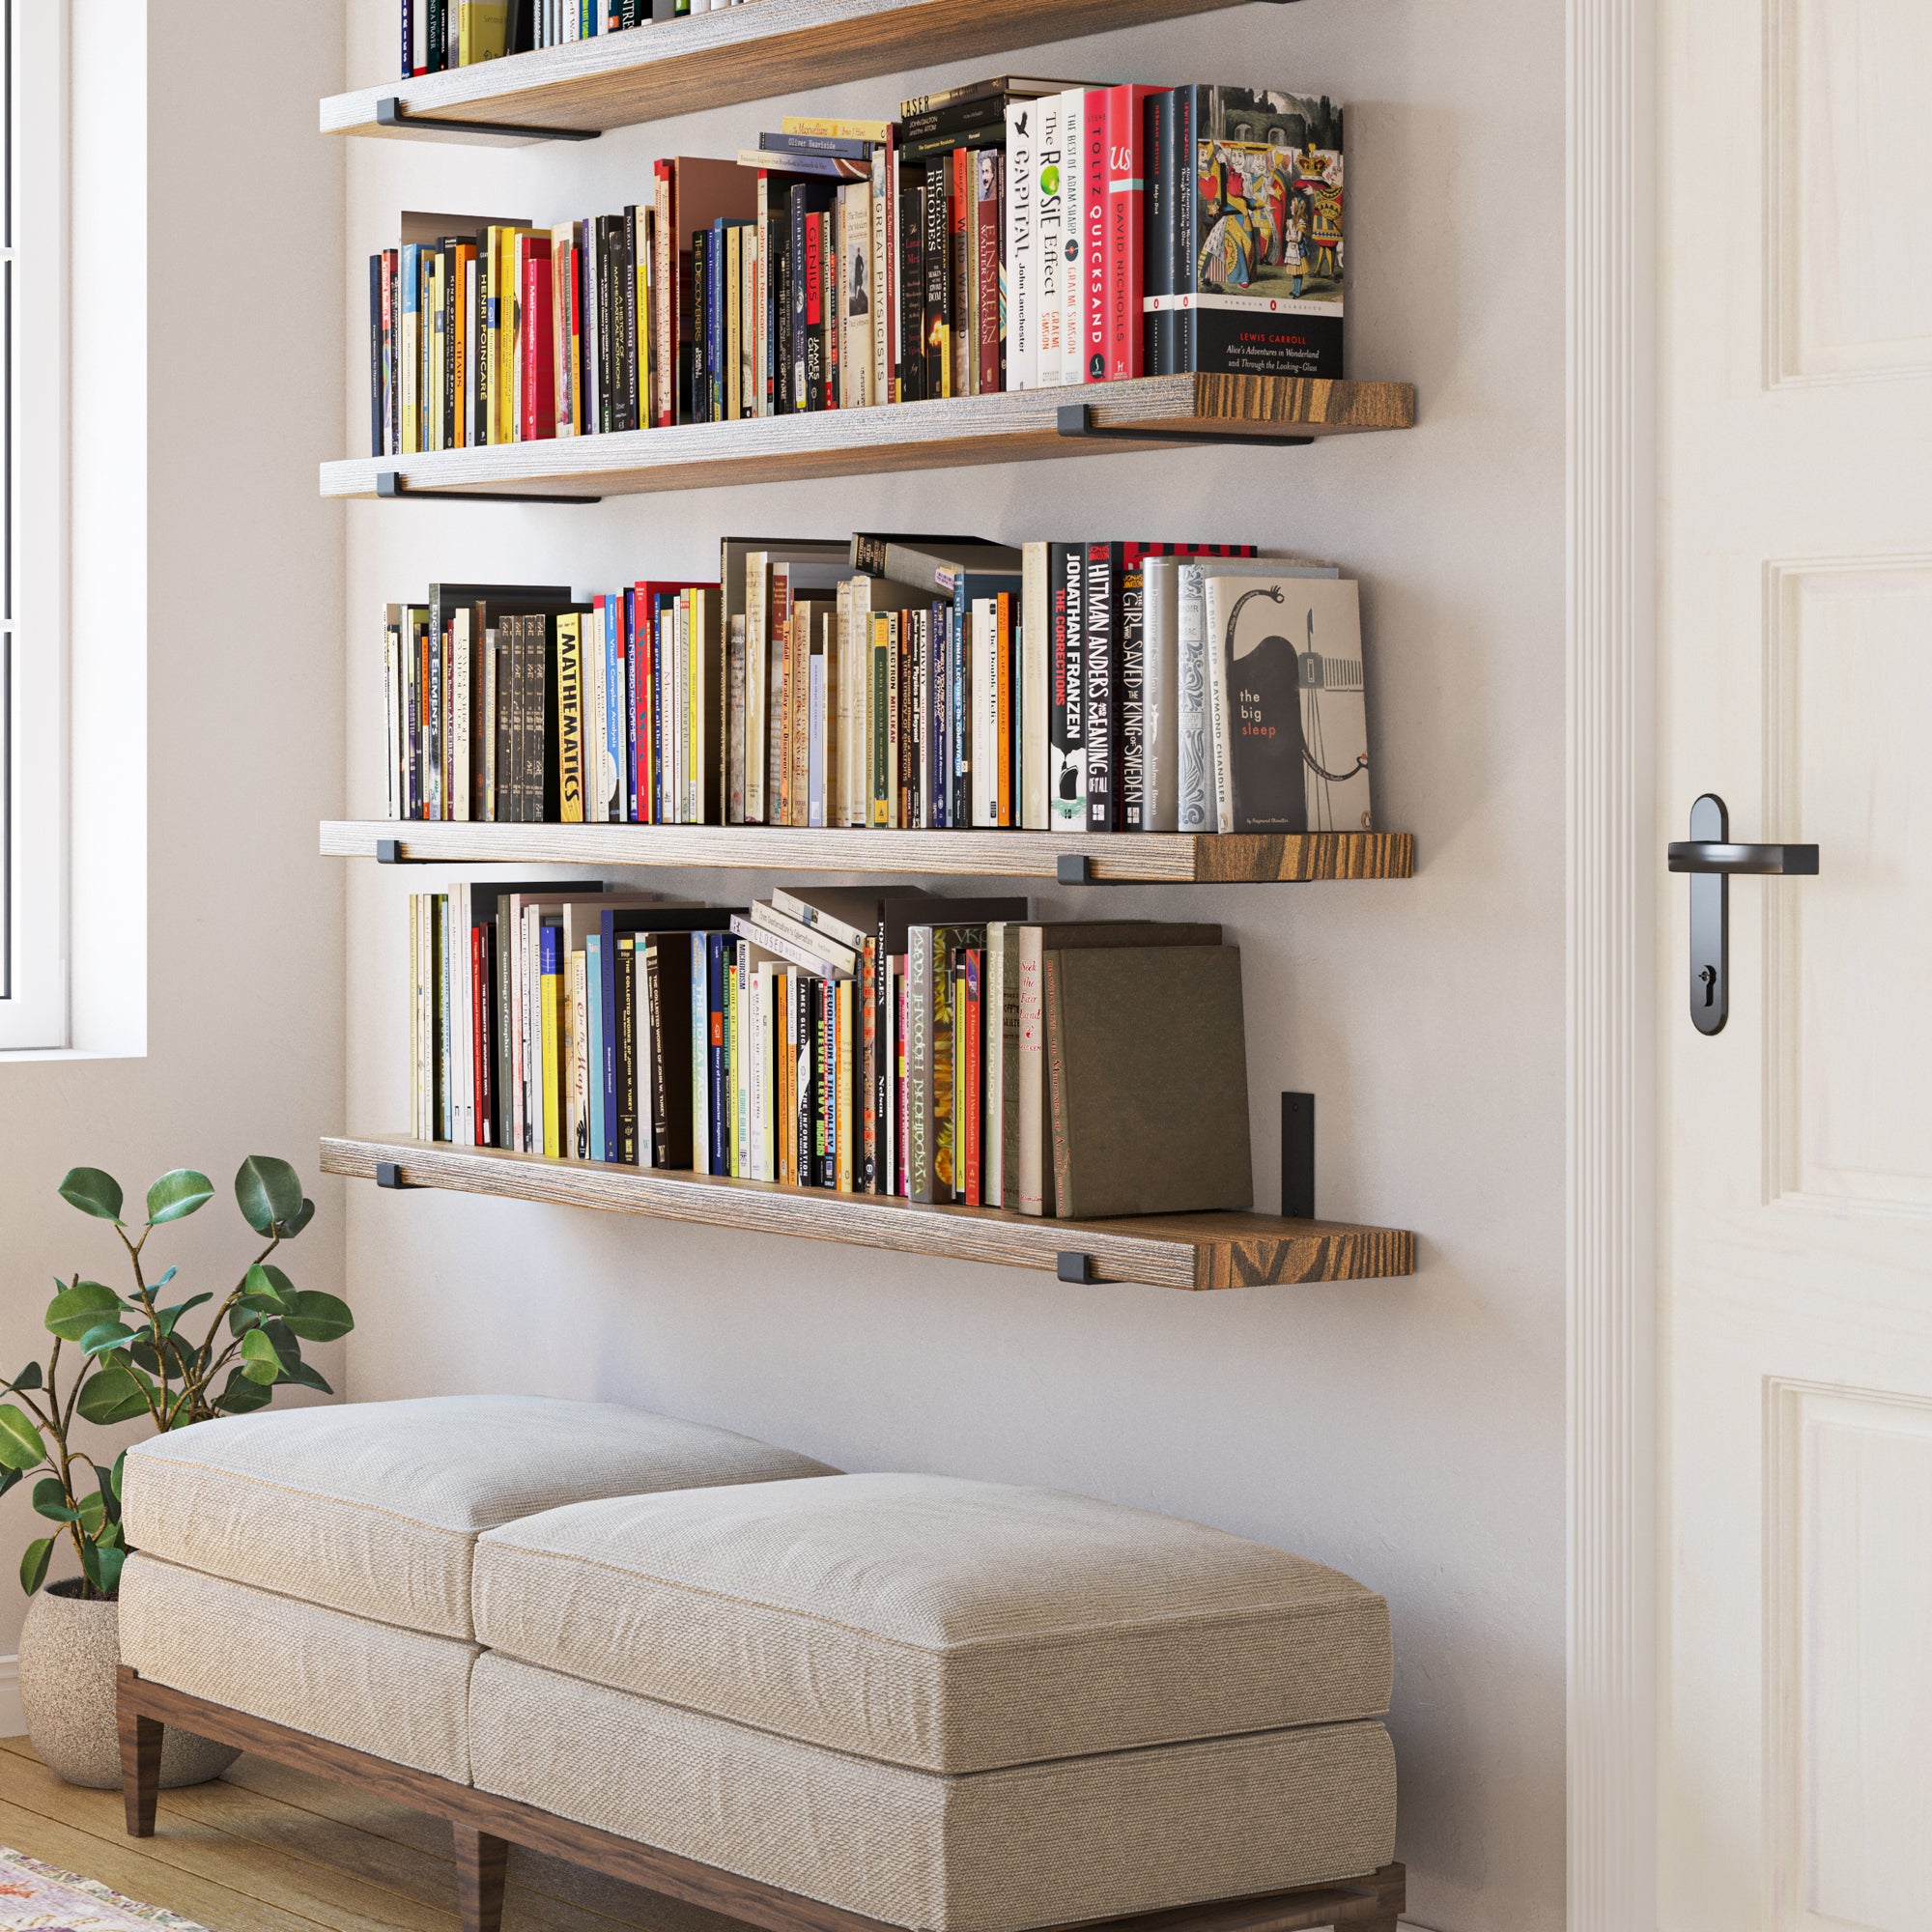 Wall of floating bookshelves in a cozy reading nook, densely packed with a colorful array of books, enhancing a warm, inviting atmosphere.